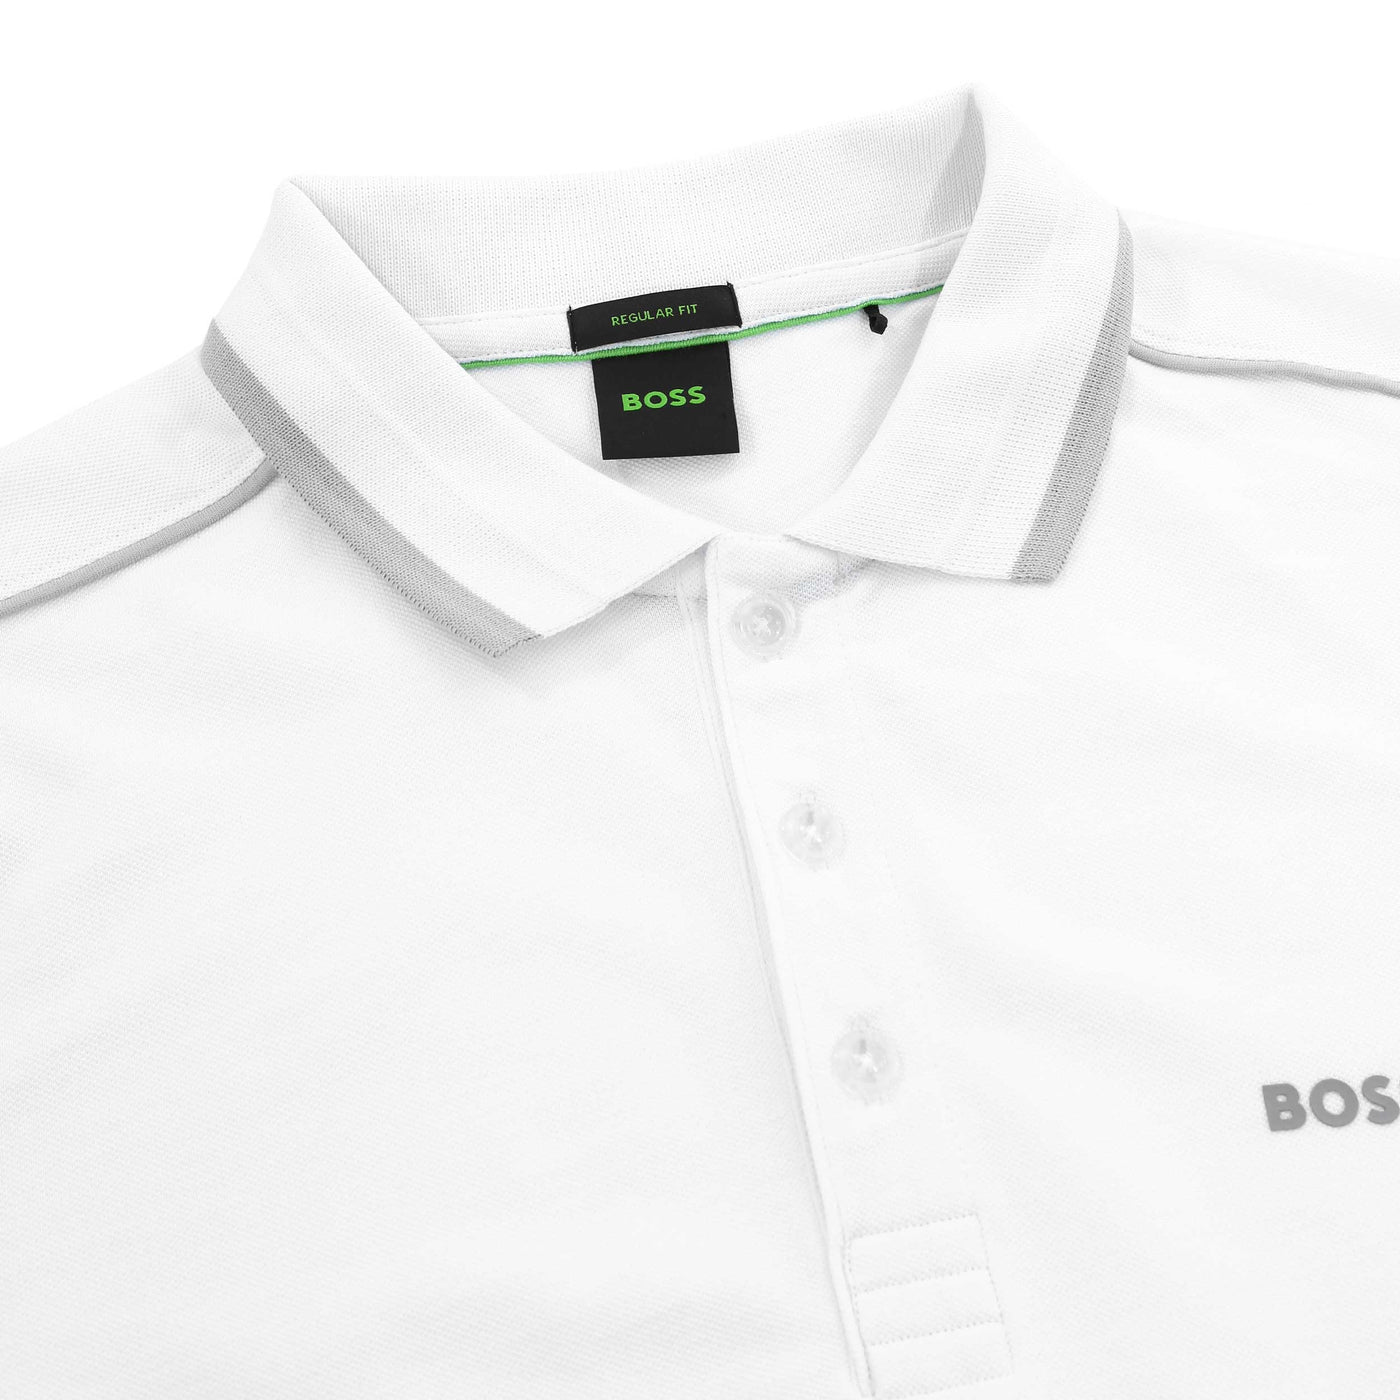 BOSS Paddy 1 Polo Shirt in White Collar